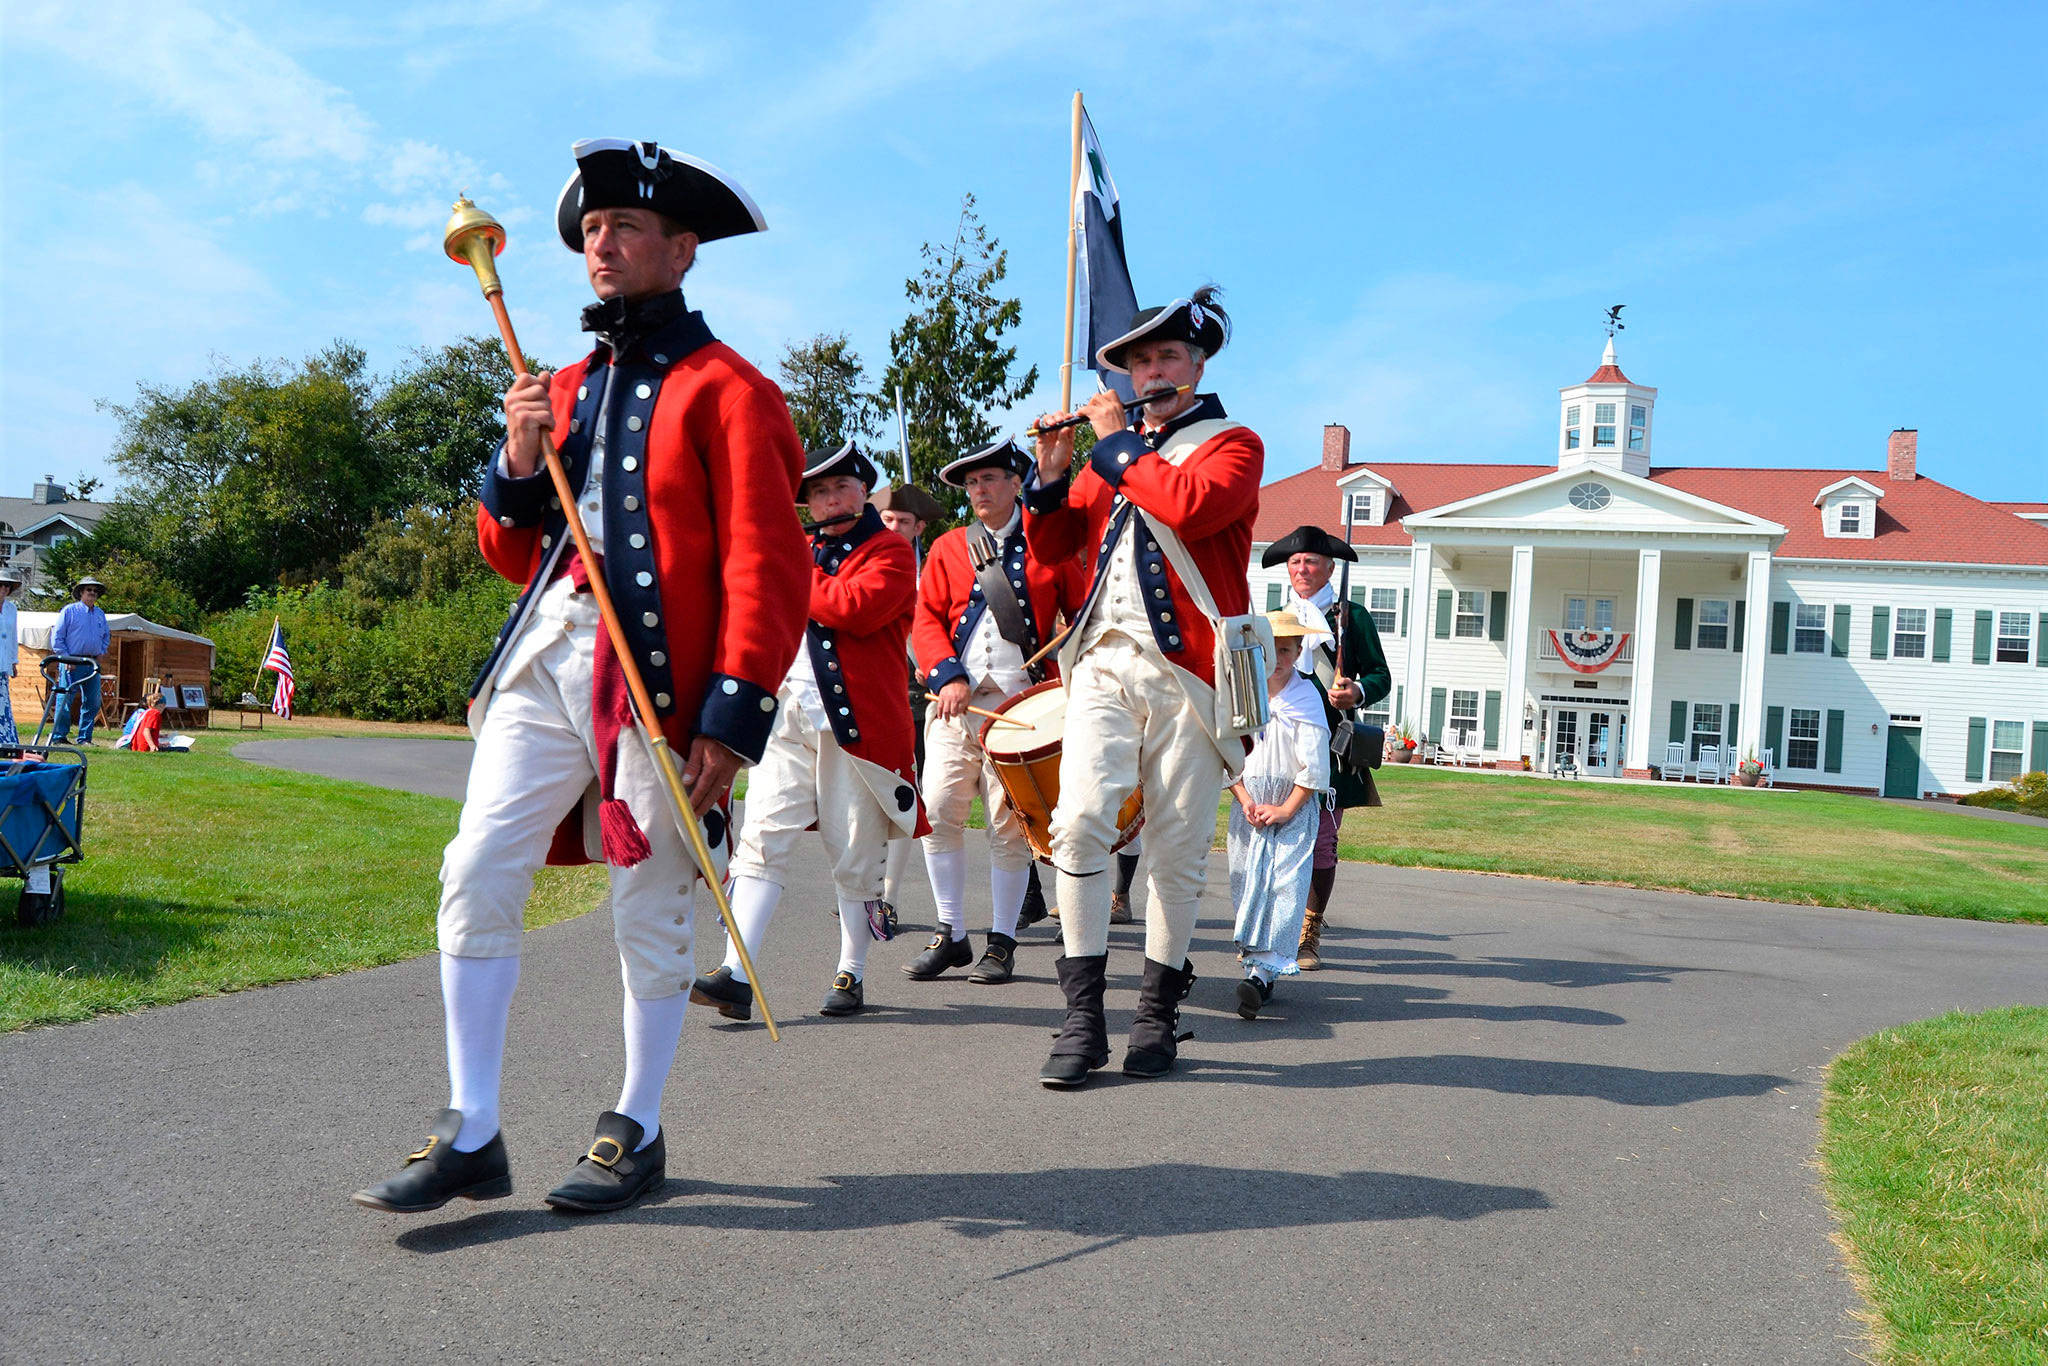 Dozens of reenactors return for the fourth Northwest Colonial Festival Aug. 9-12, at the George Washington Inn where they’ll recreate the Skirmish at Lexington Green and Battle for Concord Bridge daily.